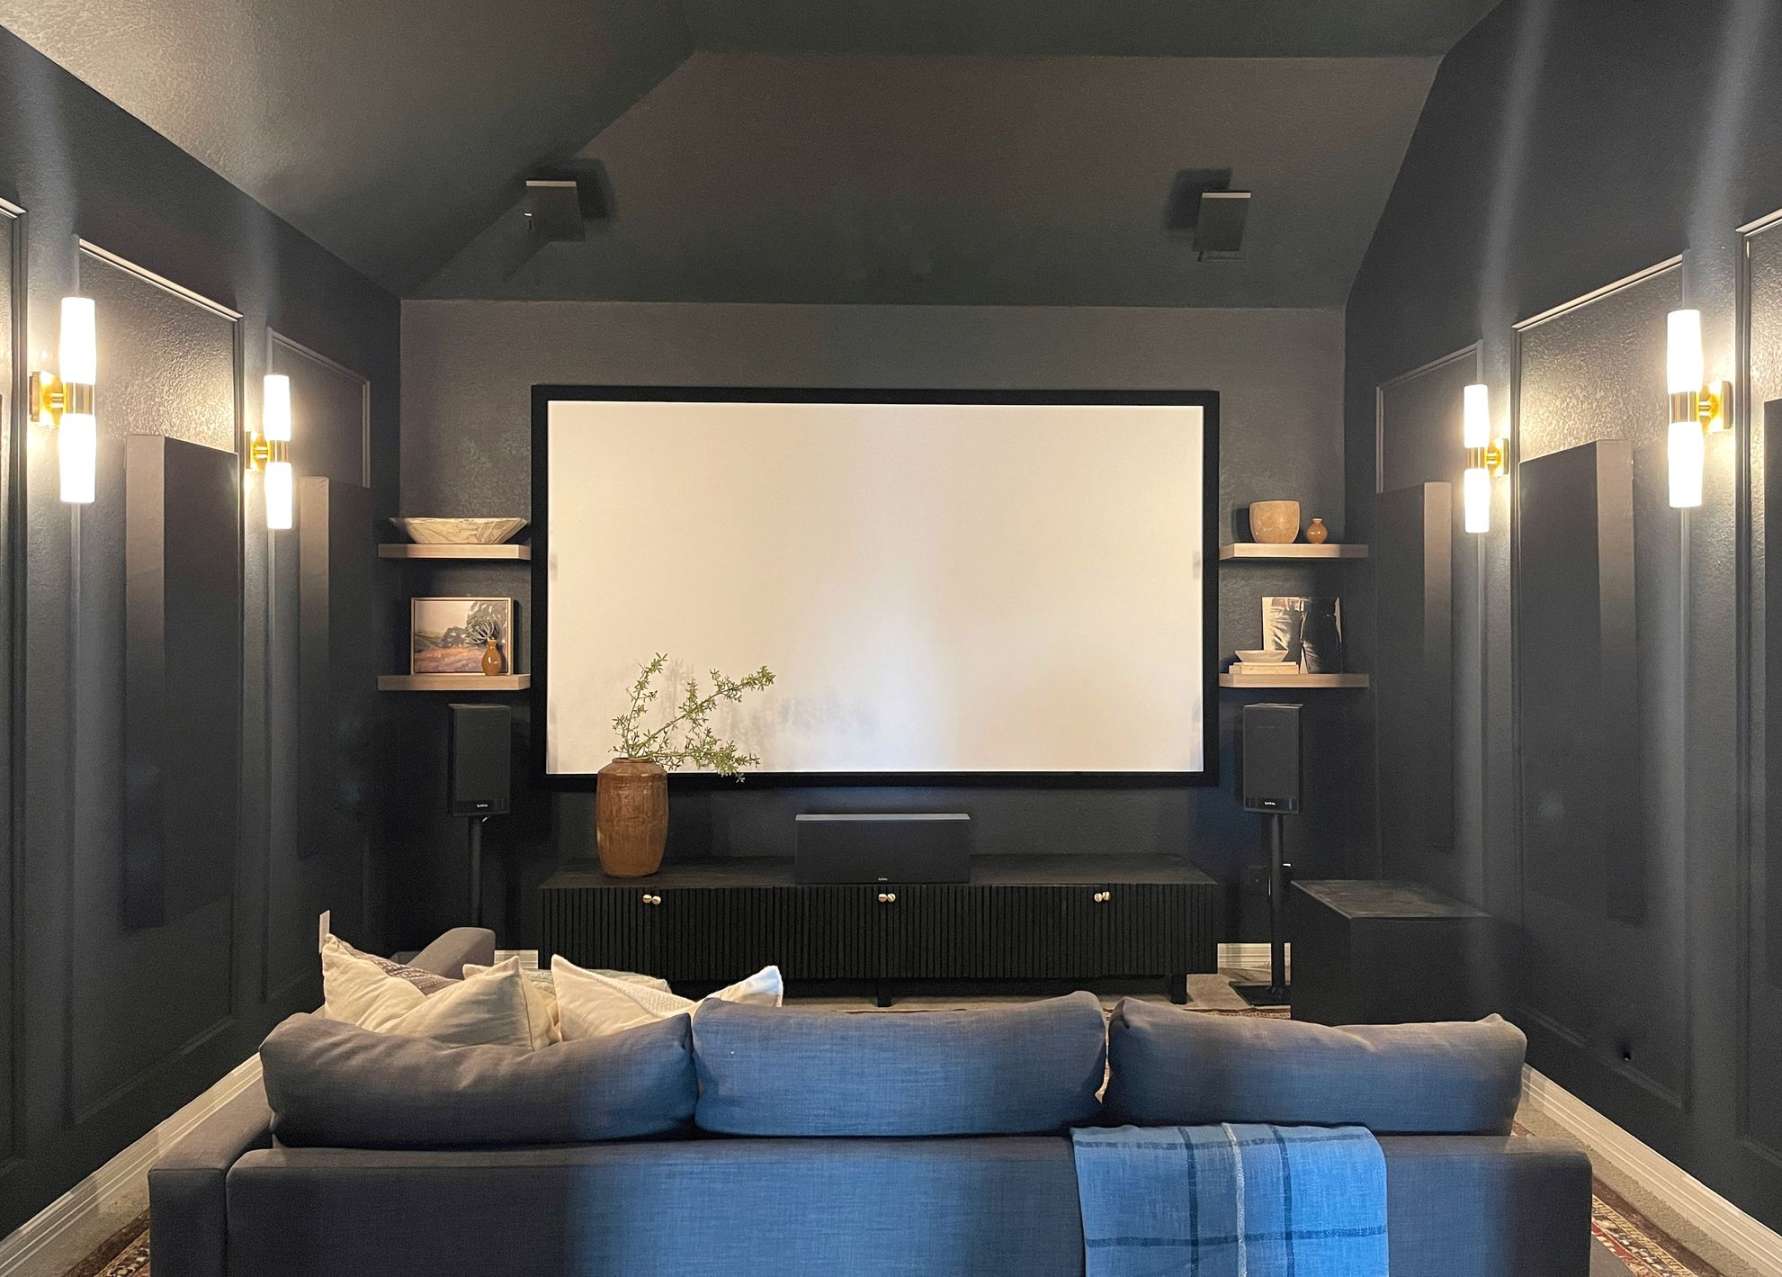 Media Room Makeover with Budget Friendly Design Ideas - Pennies